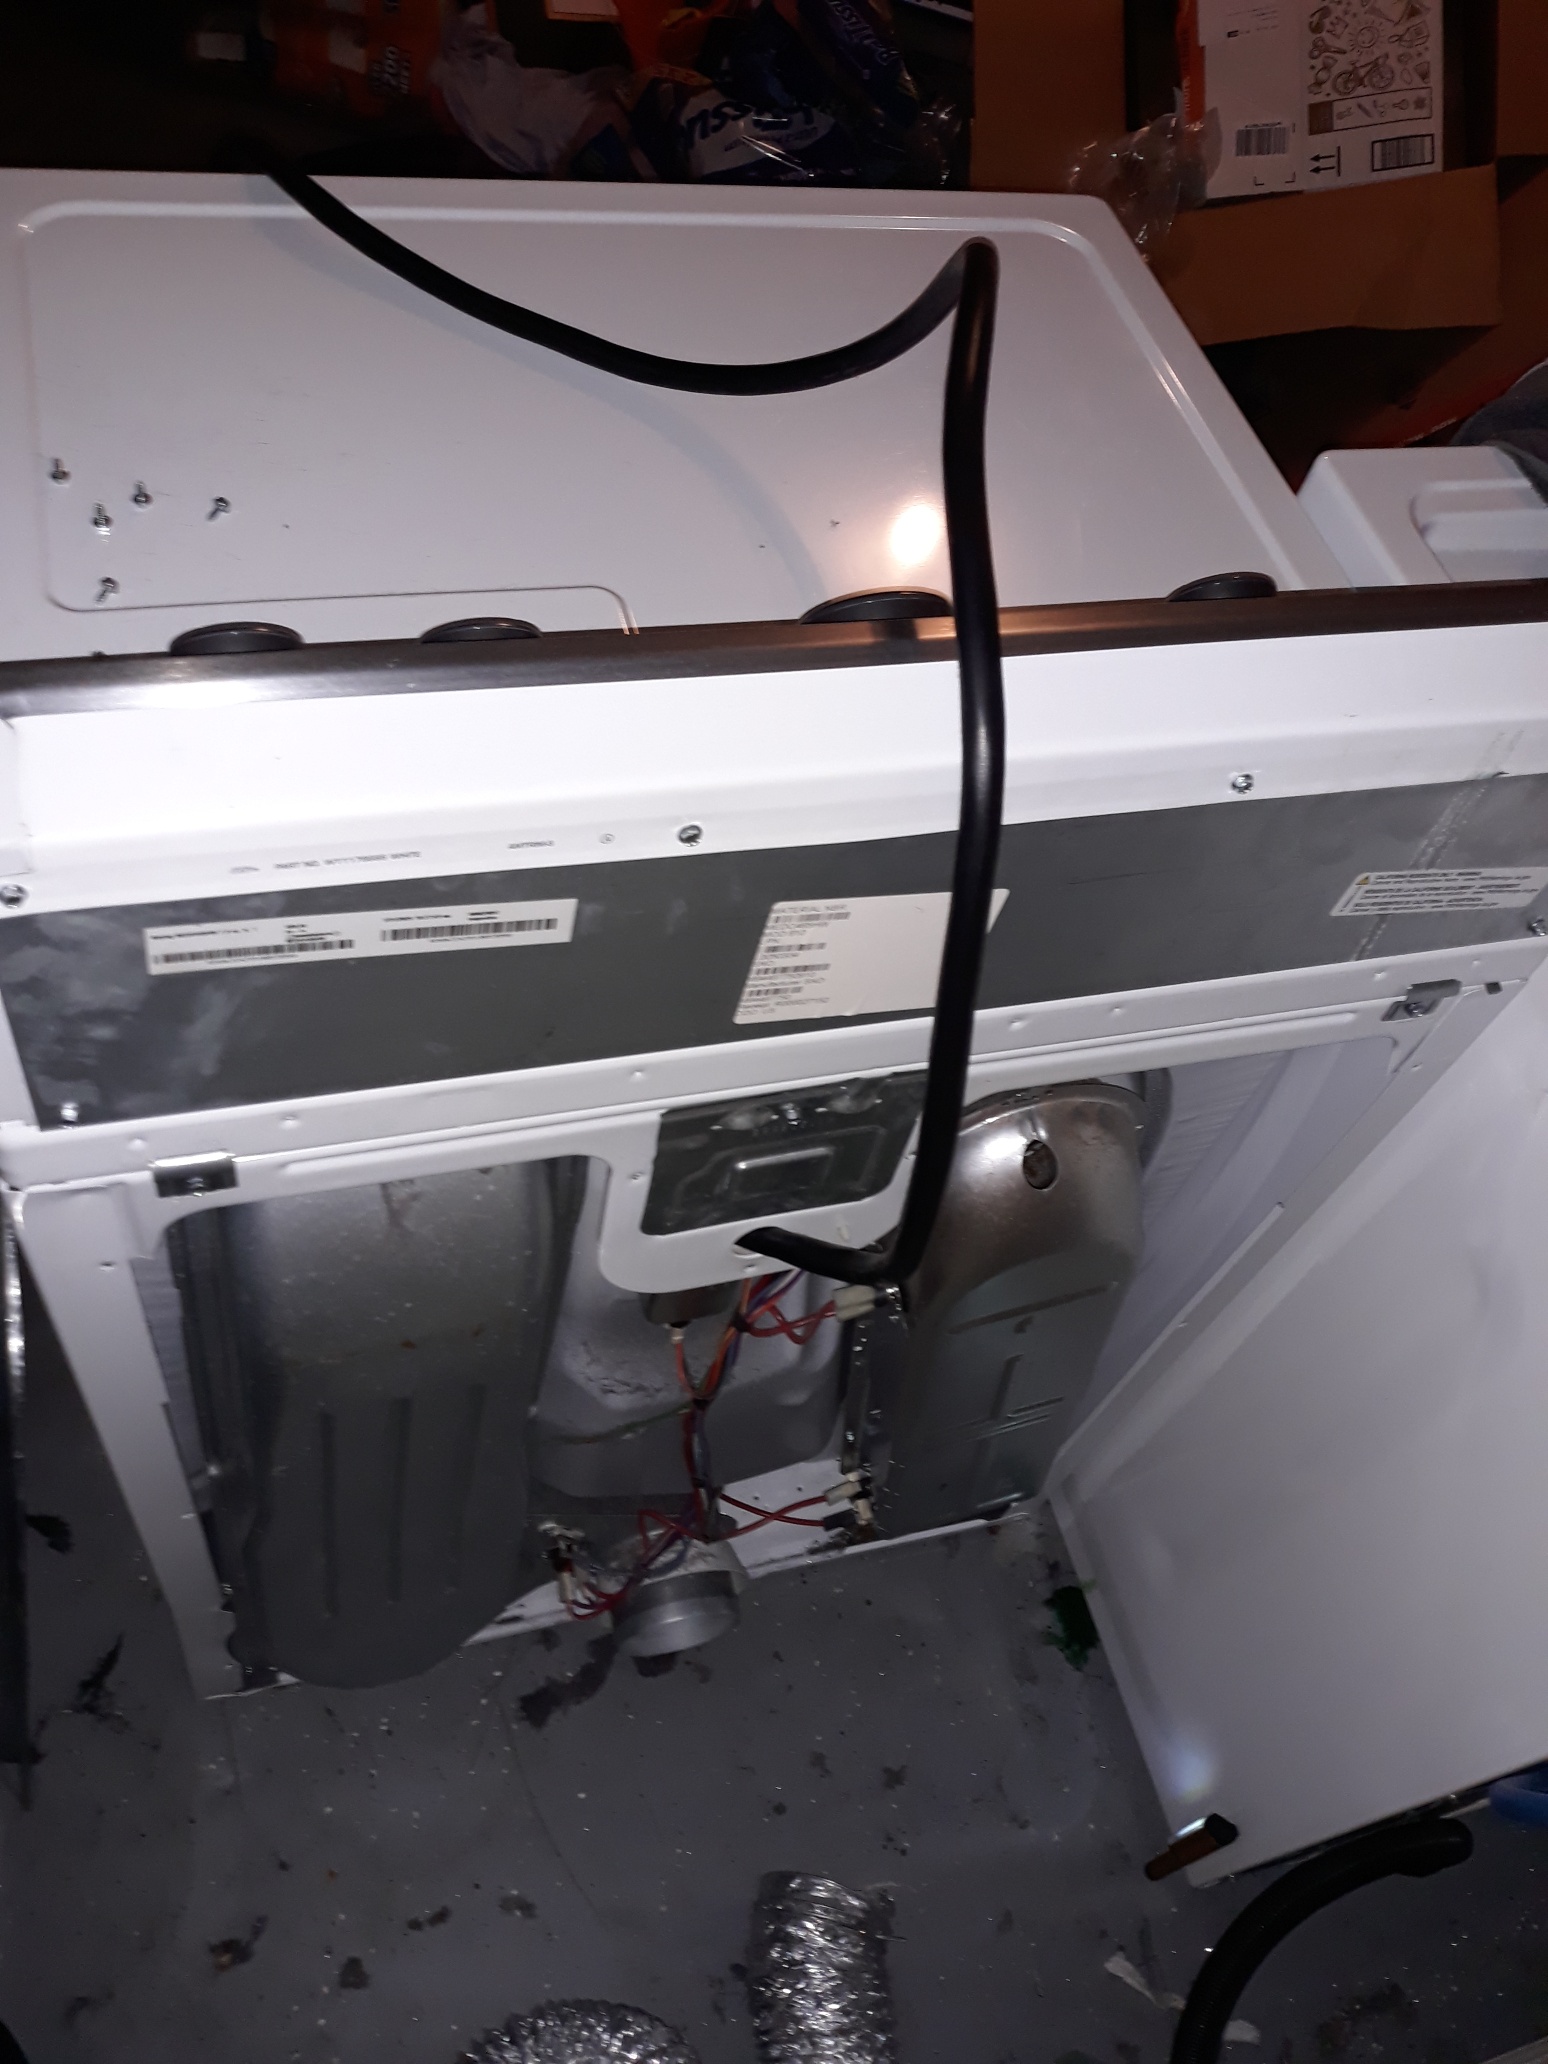 appliance repair dryer repair repaired by replacement of the failed hi-limit and safety thermofuse to restore the safety circuit graham dr coleman fl 33521